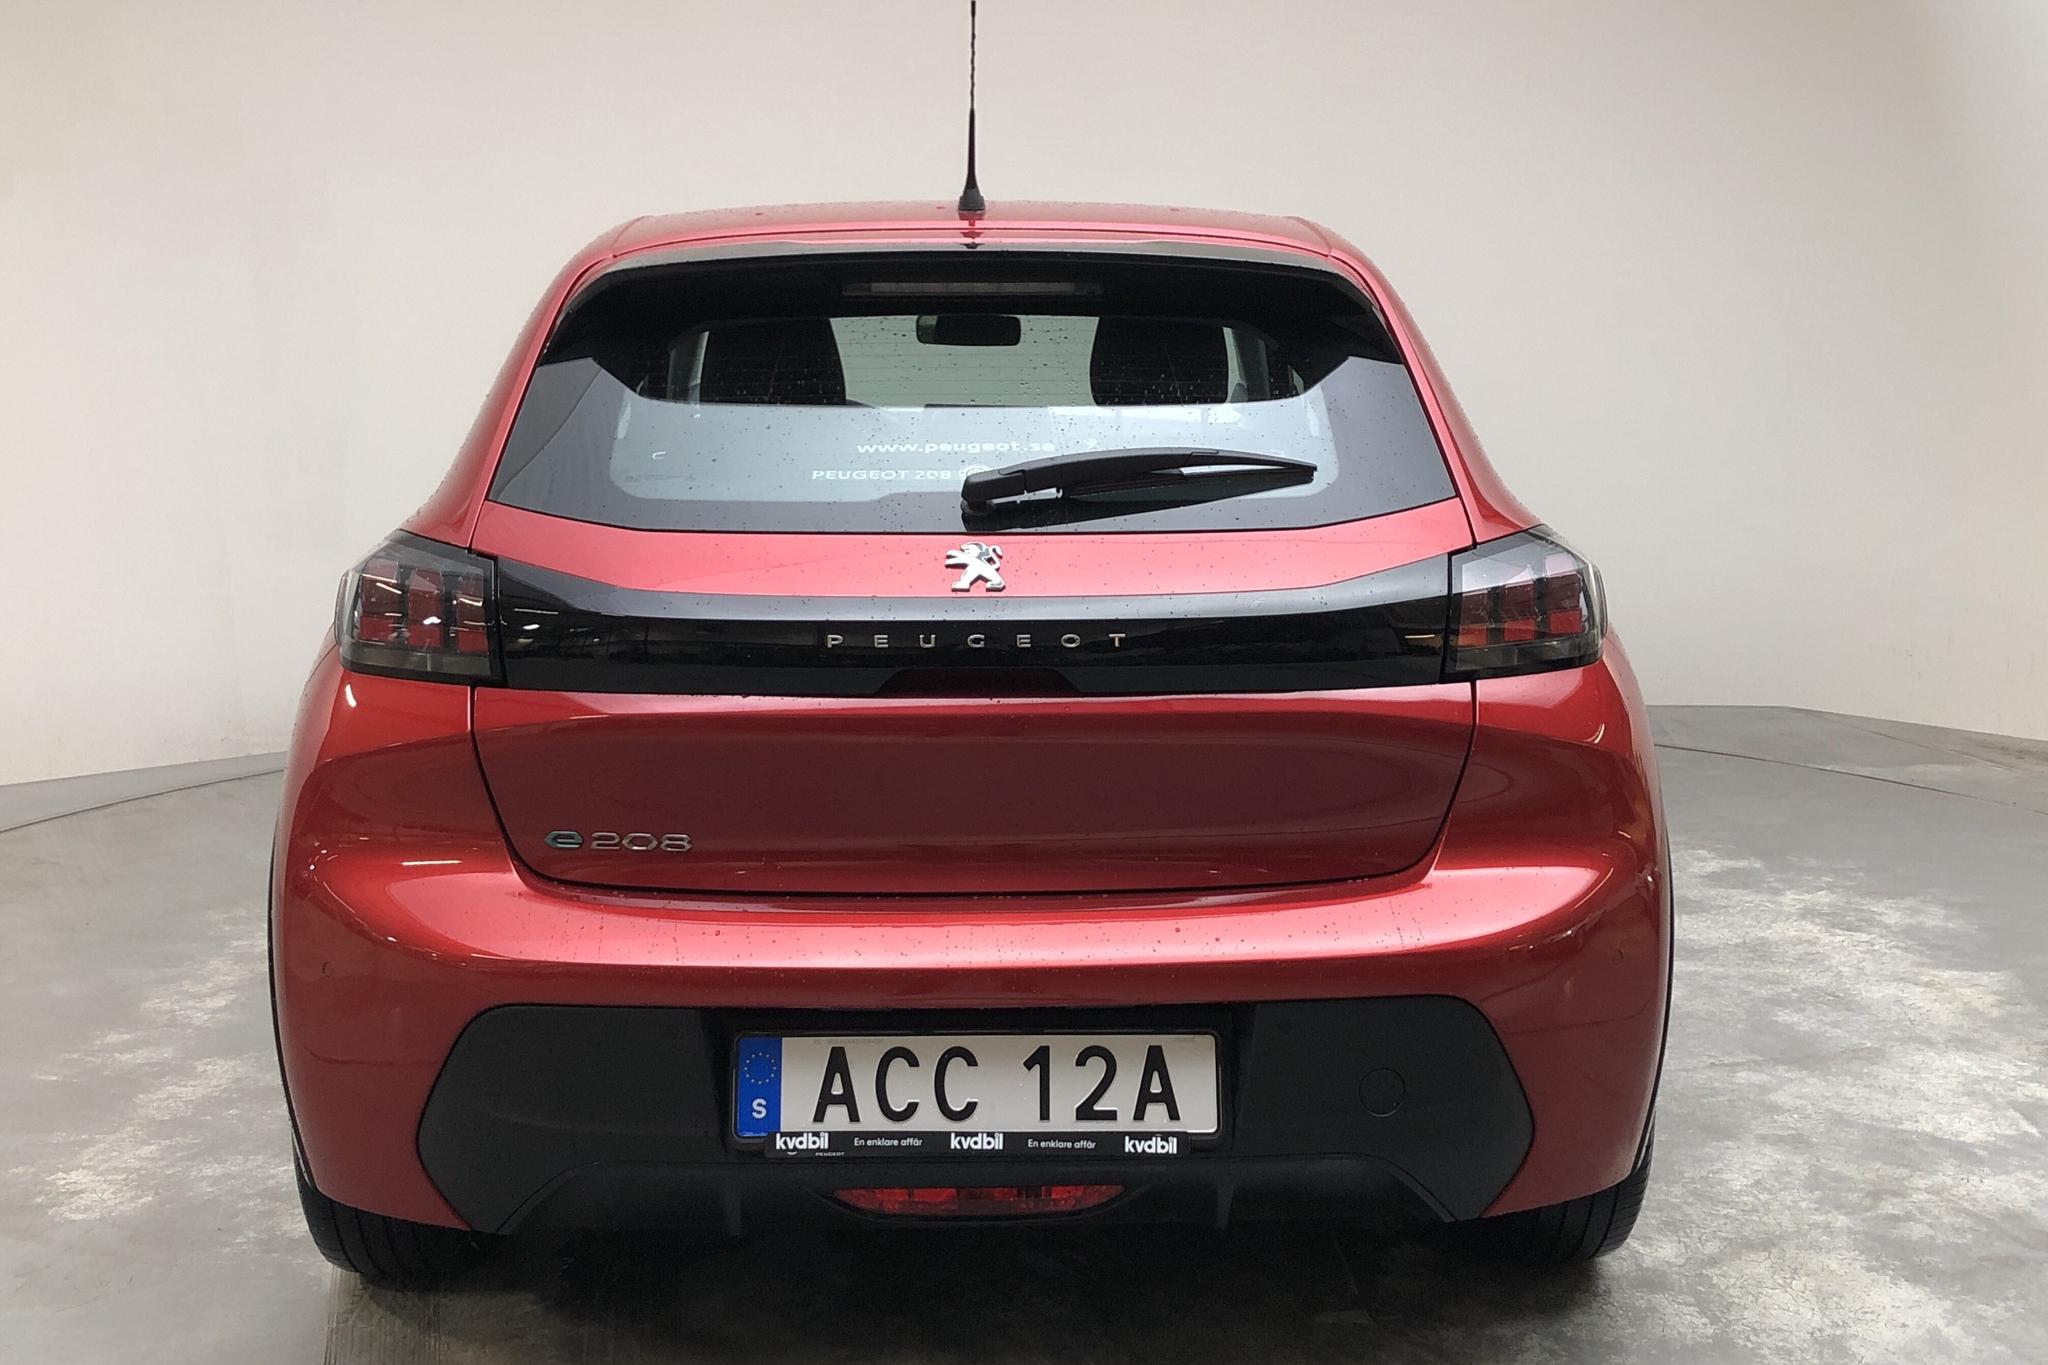 Peugeot e-208 50 kWh 5dr (136hk) - 56 530 km - Automatic - red - 2020